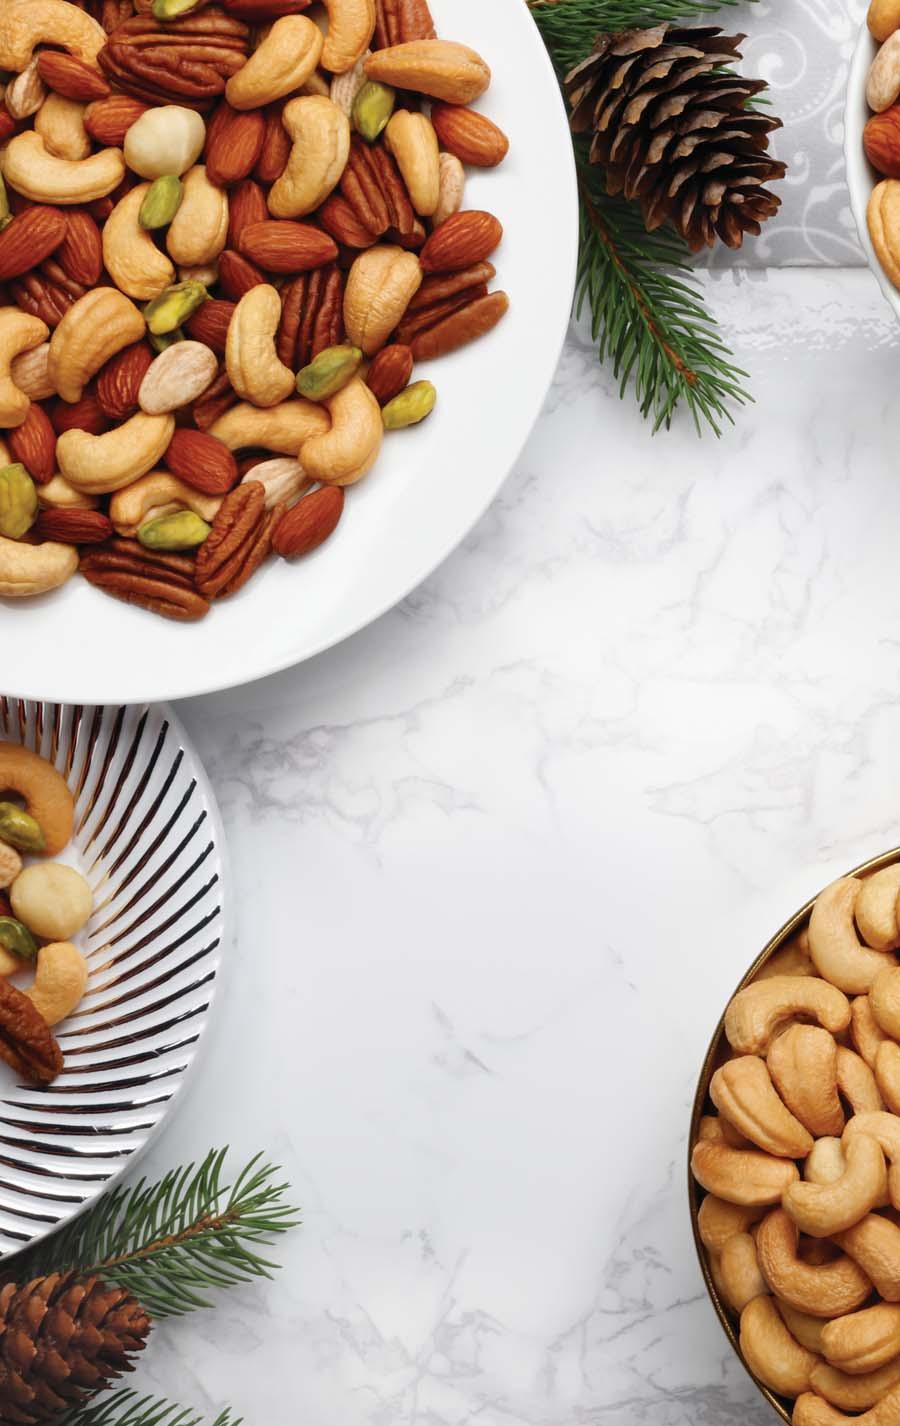 New! Ultimate Mixed Nuts We ve combined rich Macadamias, shelled Pistachios, mammoth Pecans, colossal Cashews, natural Nonpareil Almonds, and fresh blanched Almonds into a premium, gourmet delight.